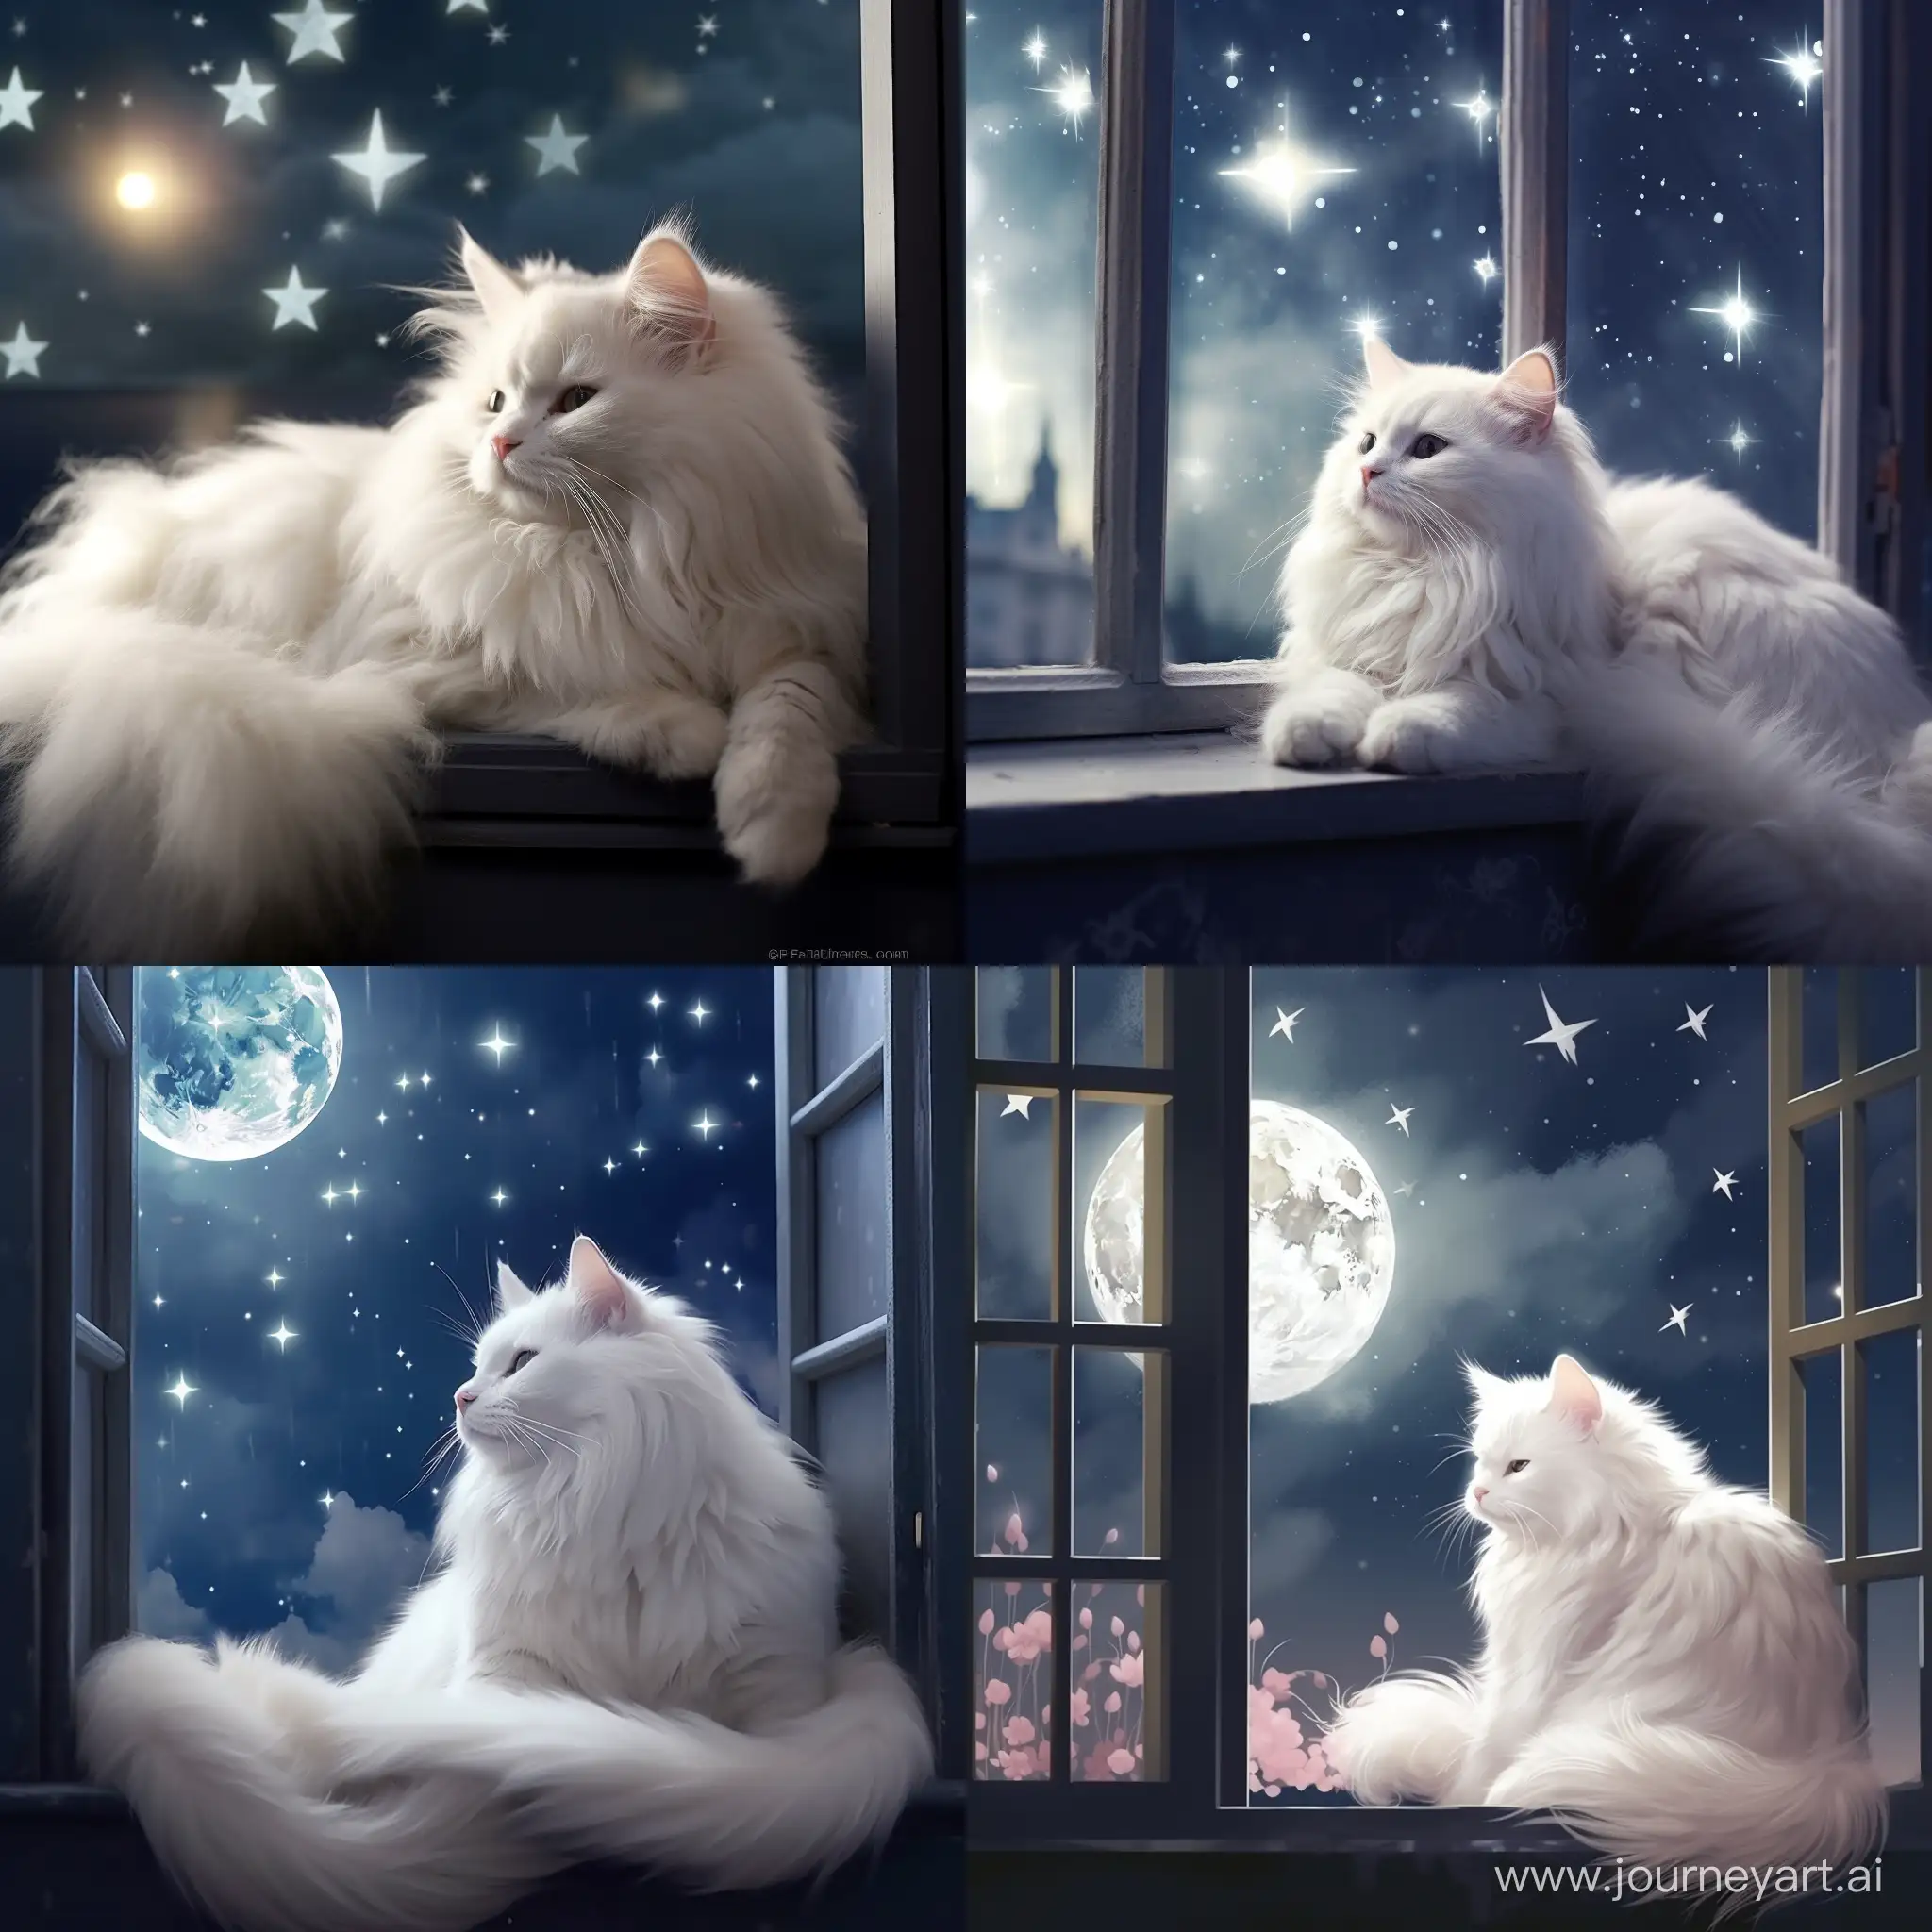 White cat sitting on the window sill during the night. There are alot of stars in the night and full moon, the windows are white and it is very romantic and beautiful picture.